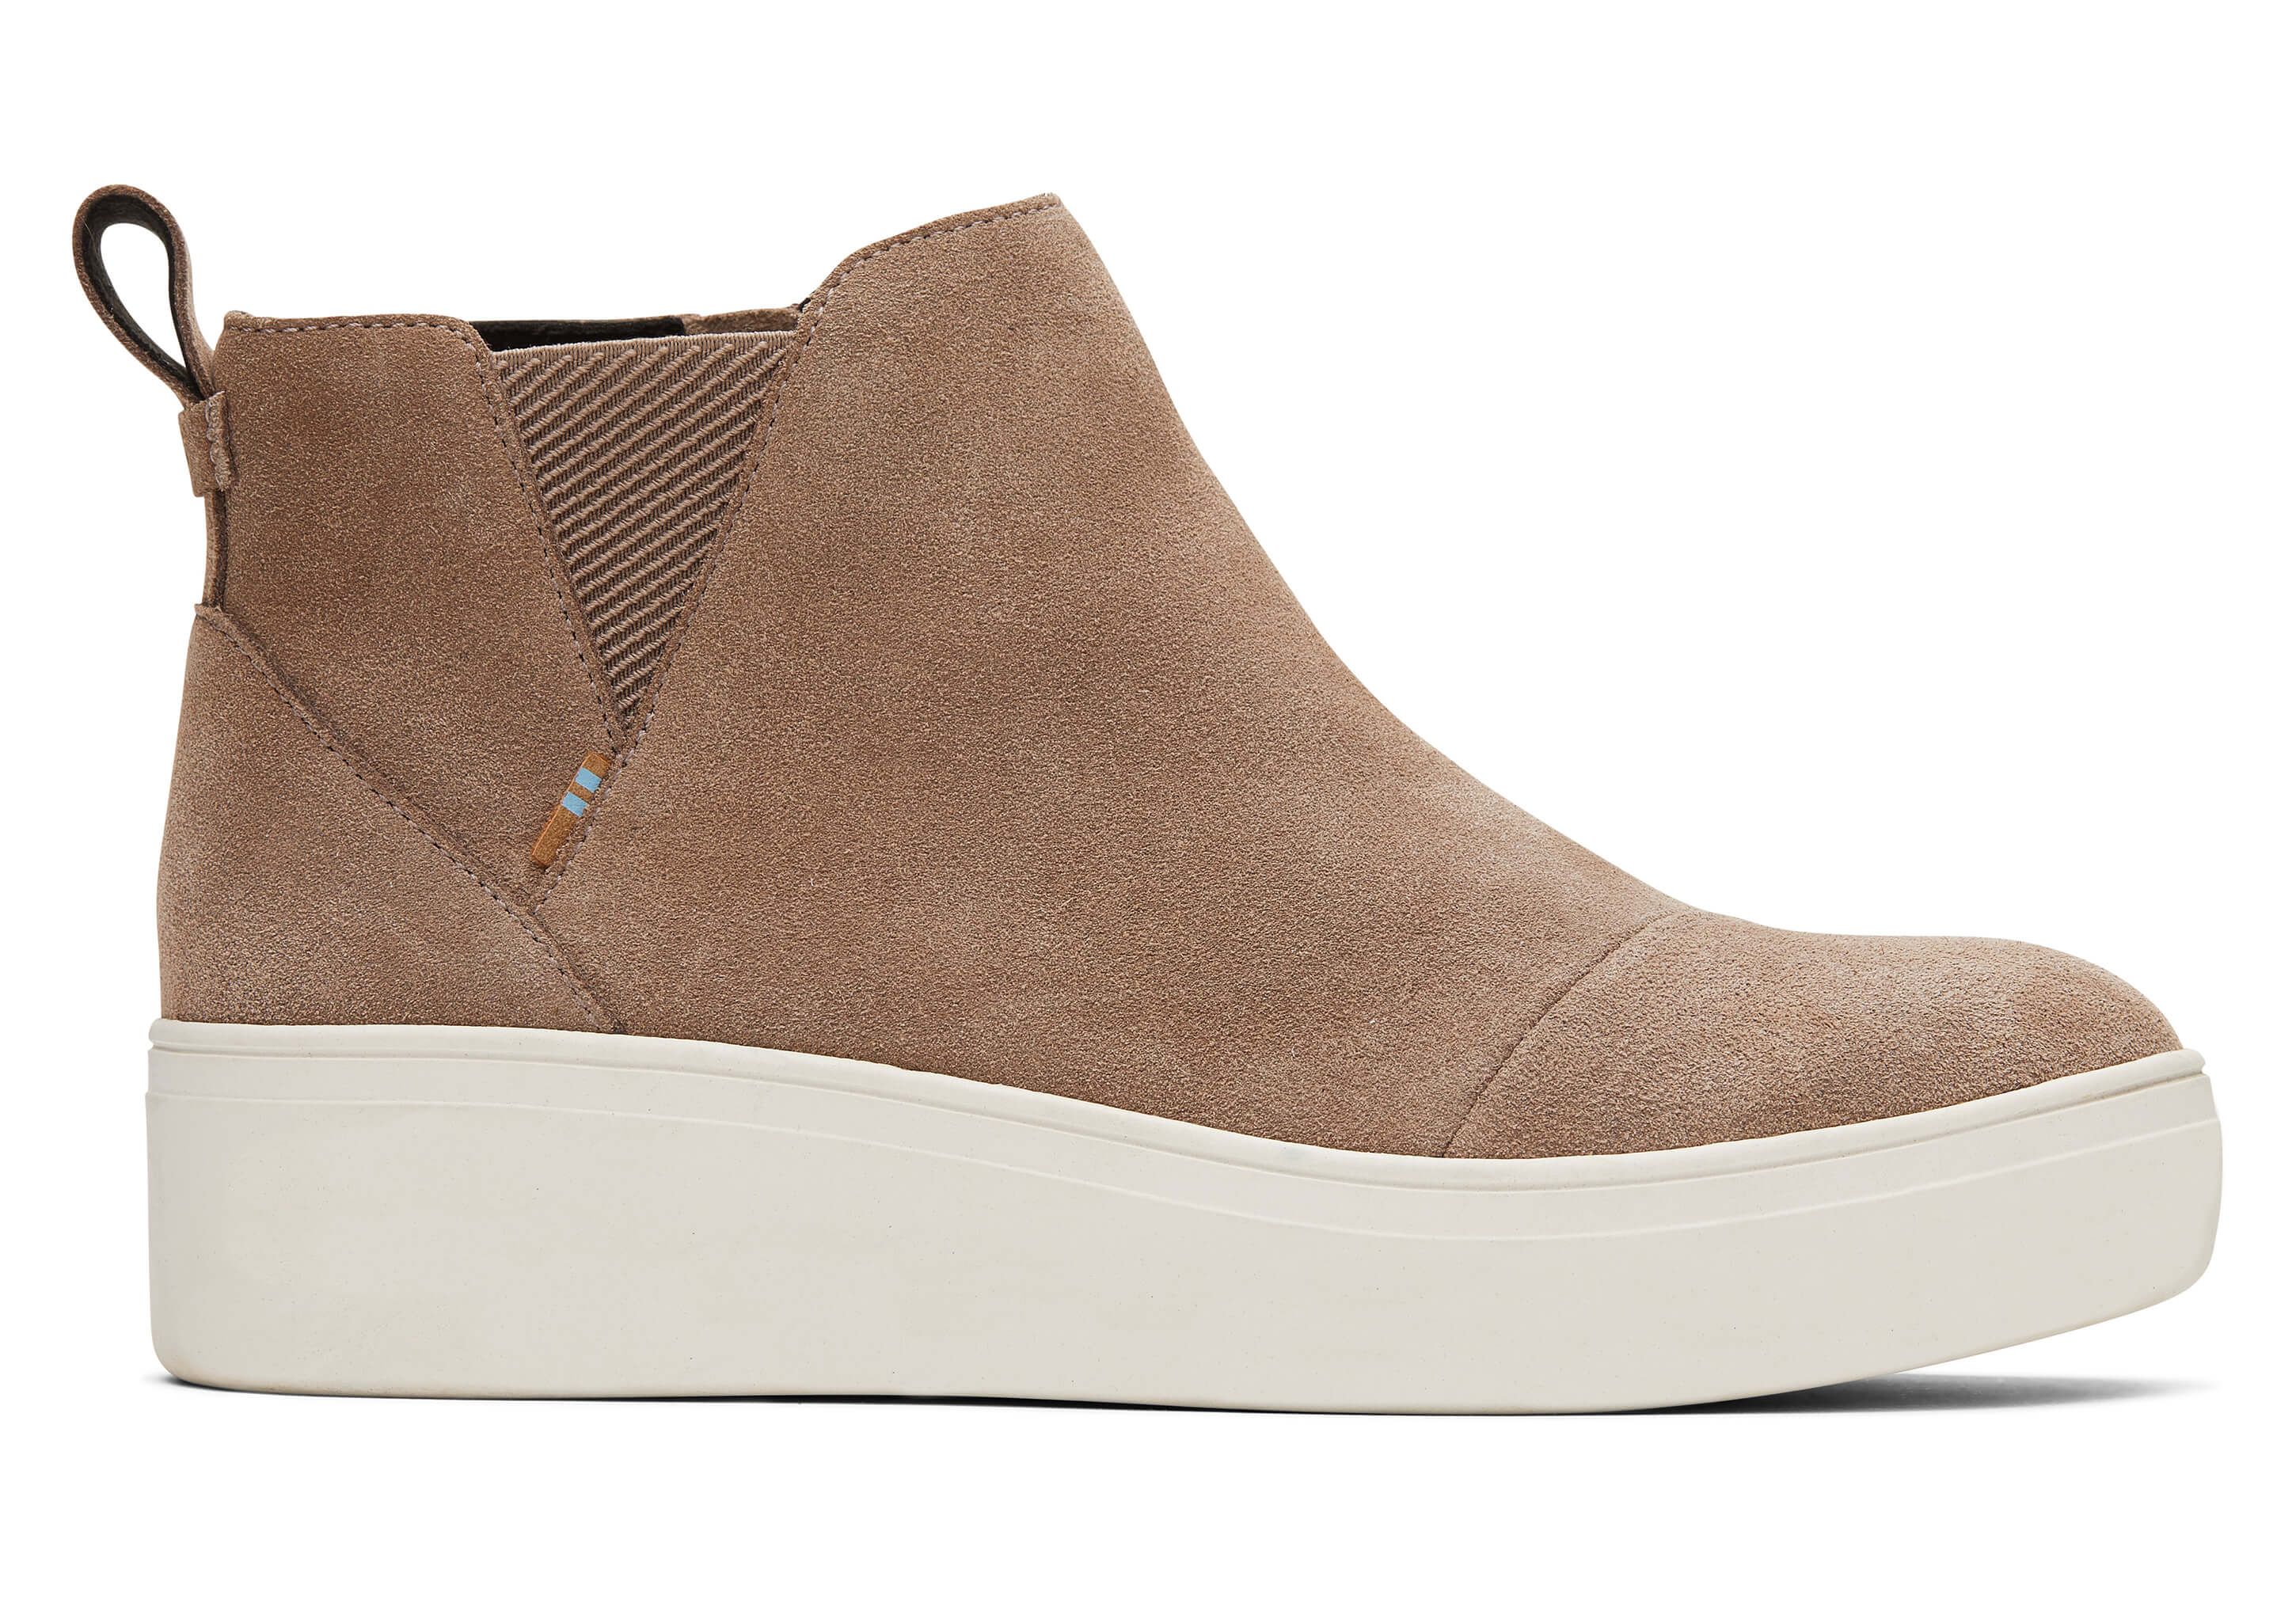 TOMS Taupe Grey Suede Women's Jamie Slip-Ons Shoes | TOMS (US)